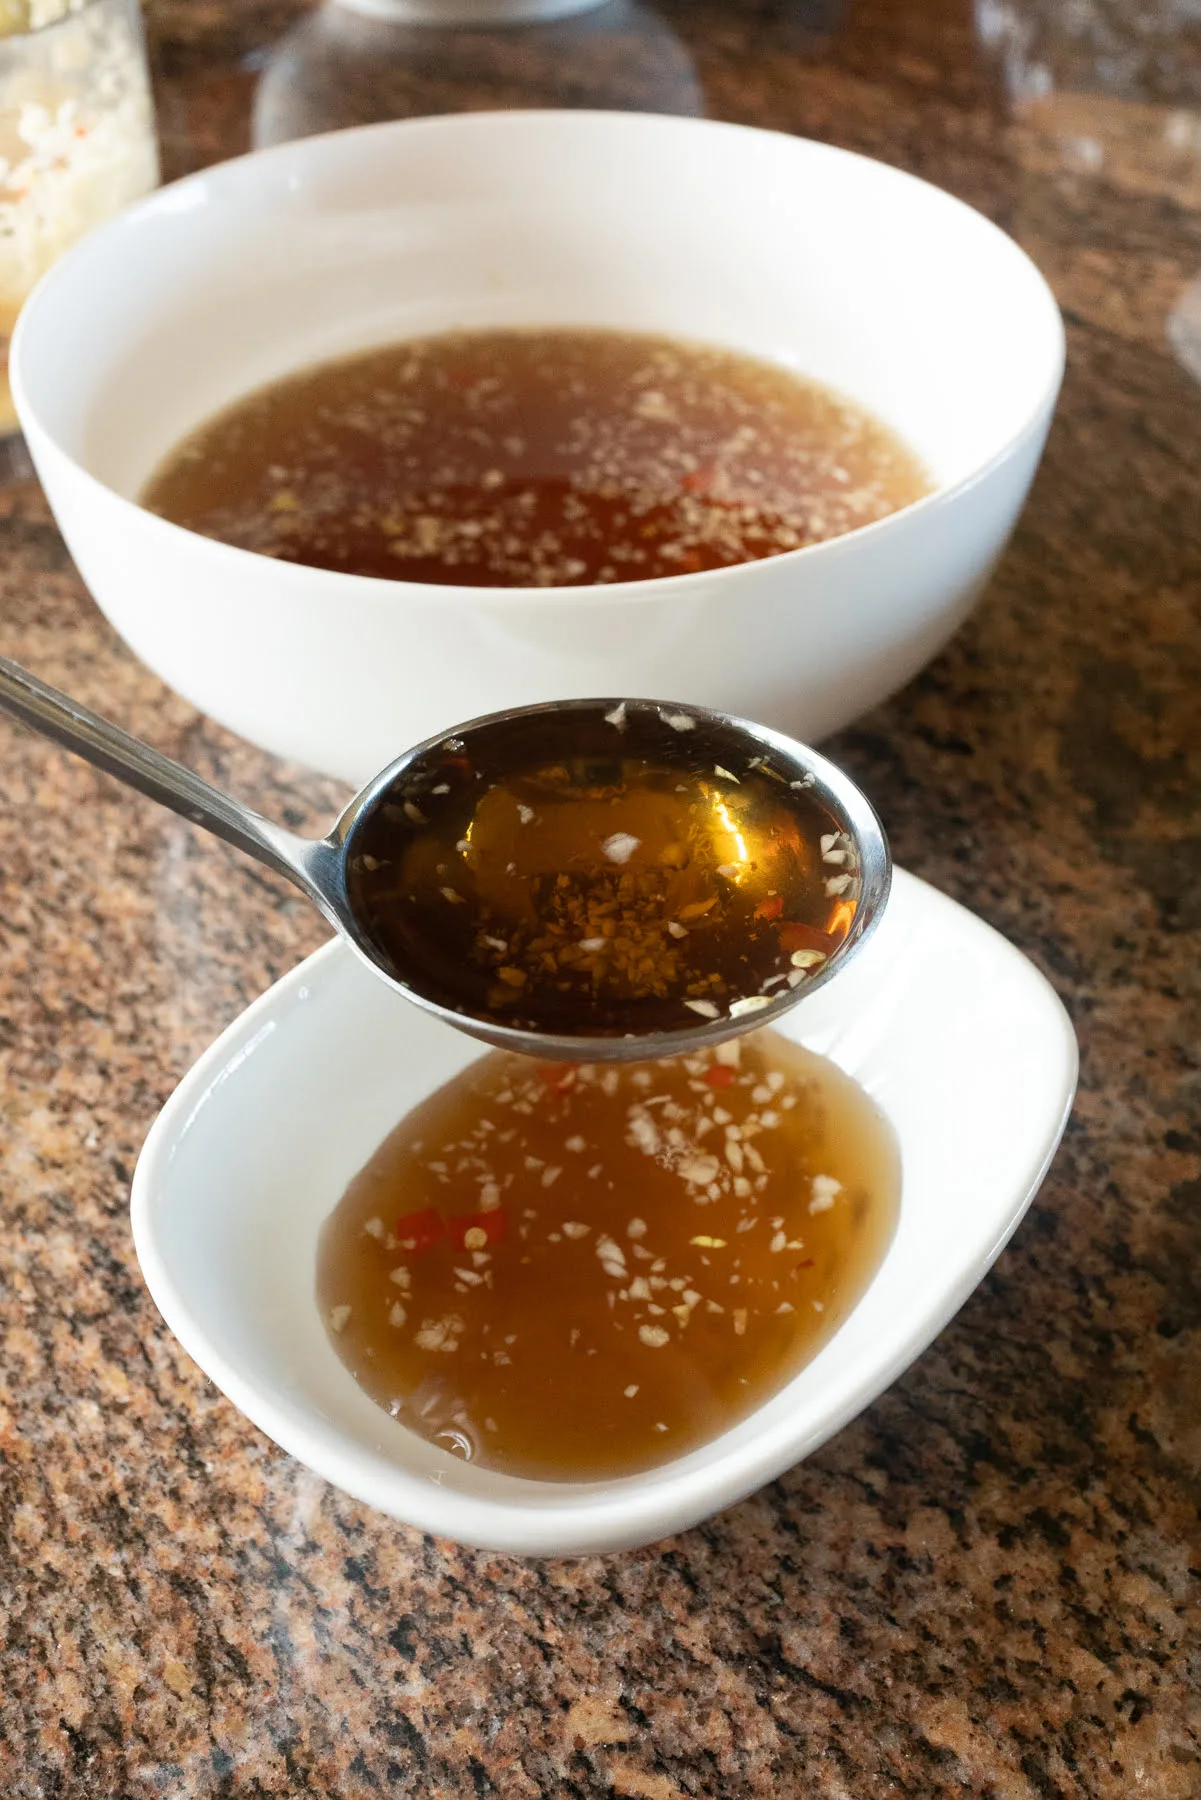 Spooning the Nuoc Cham / Nuoc Mam (Vietnamese Fish Sauce Dipping Sauce) into individual bowls for dipping.